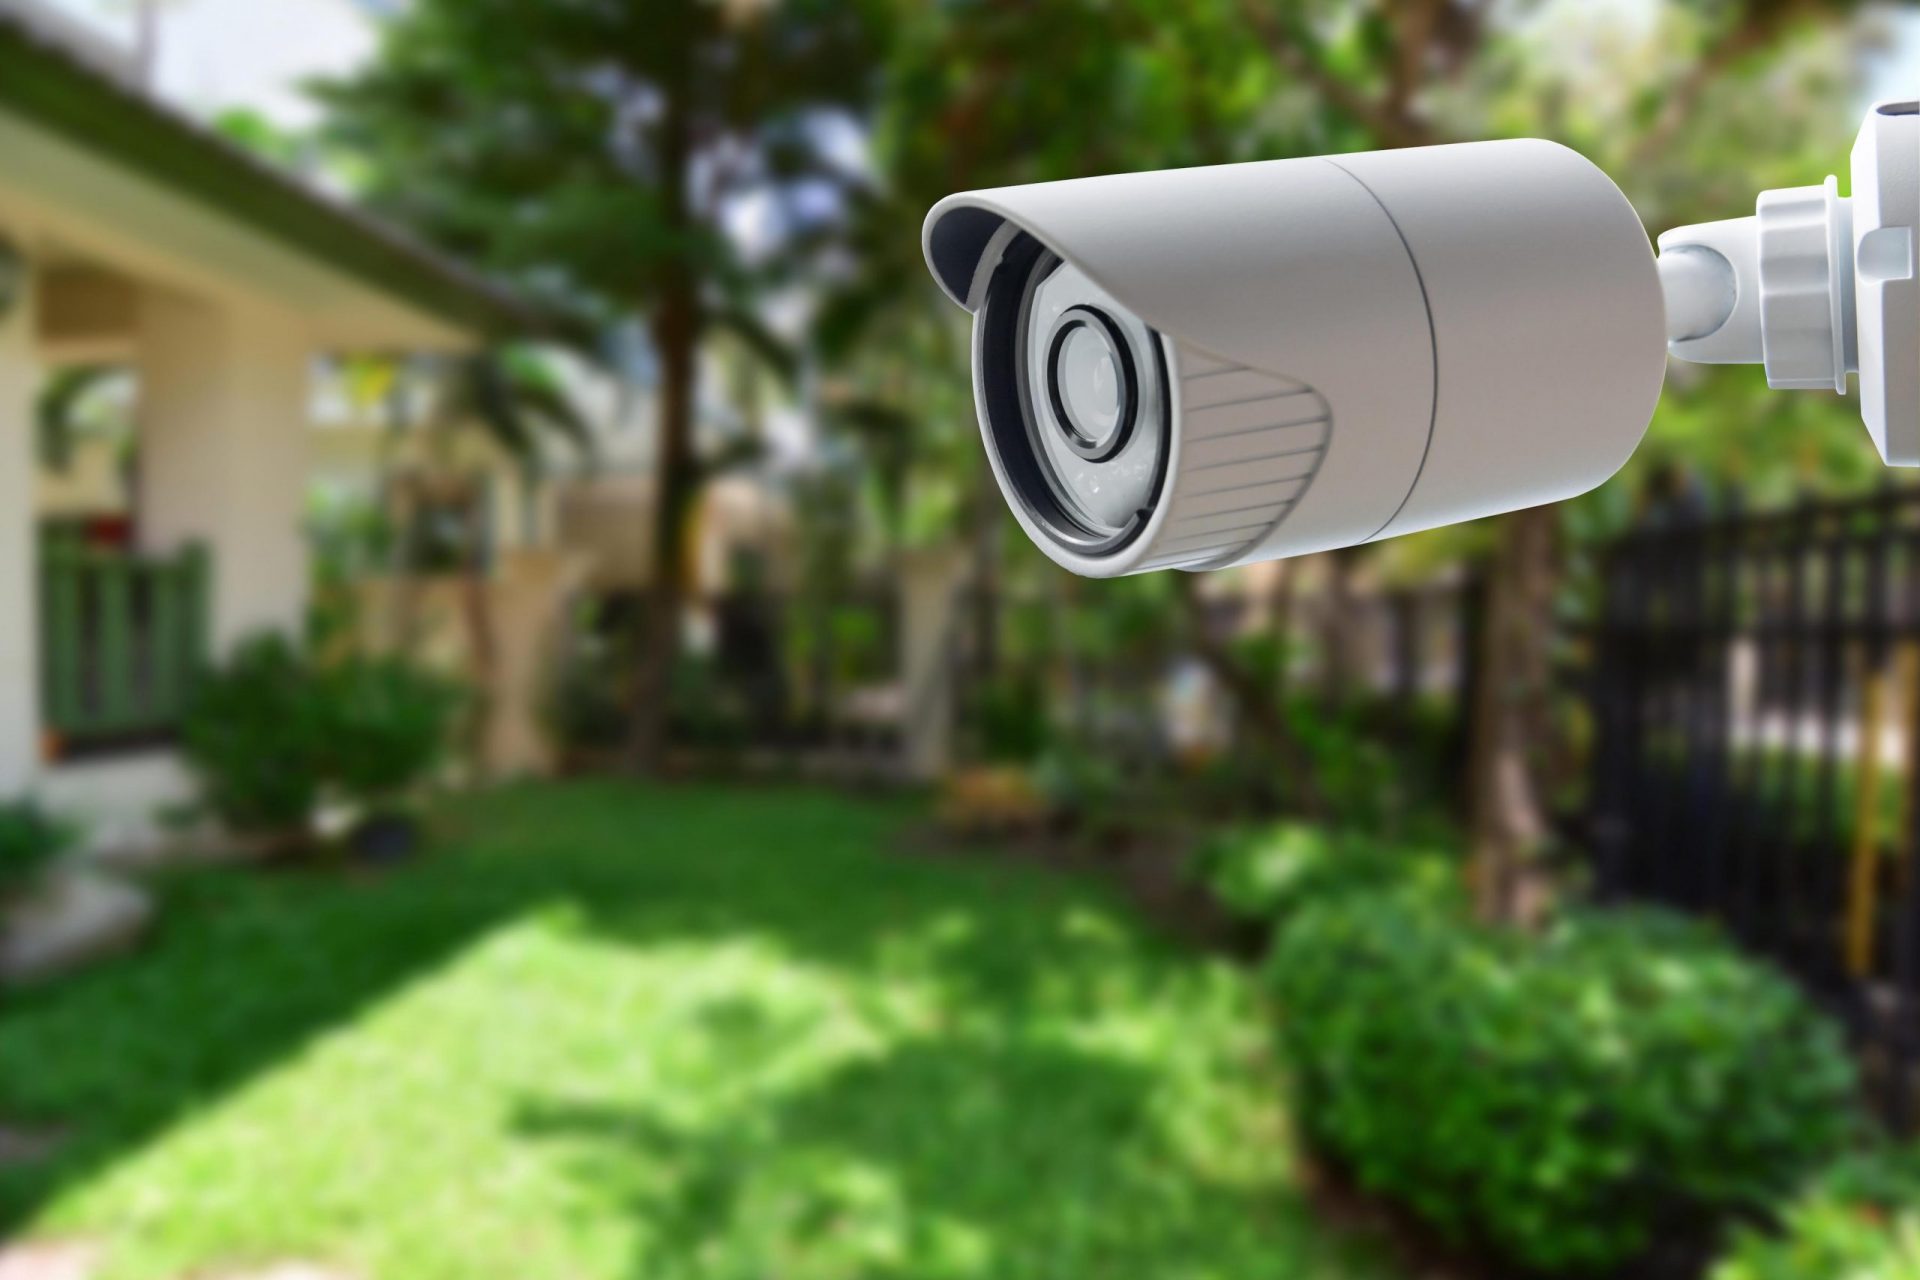 What are the latest home security gadgets